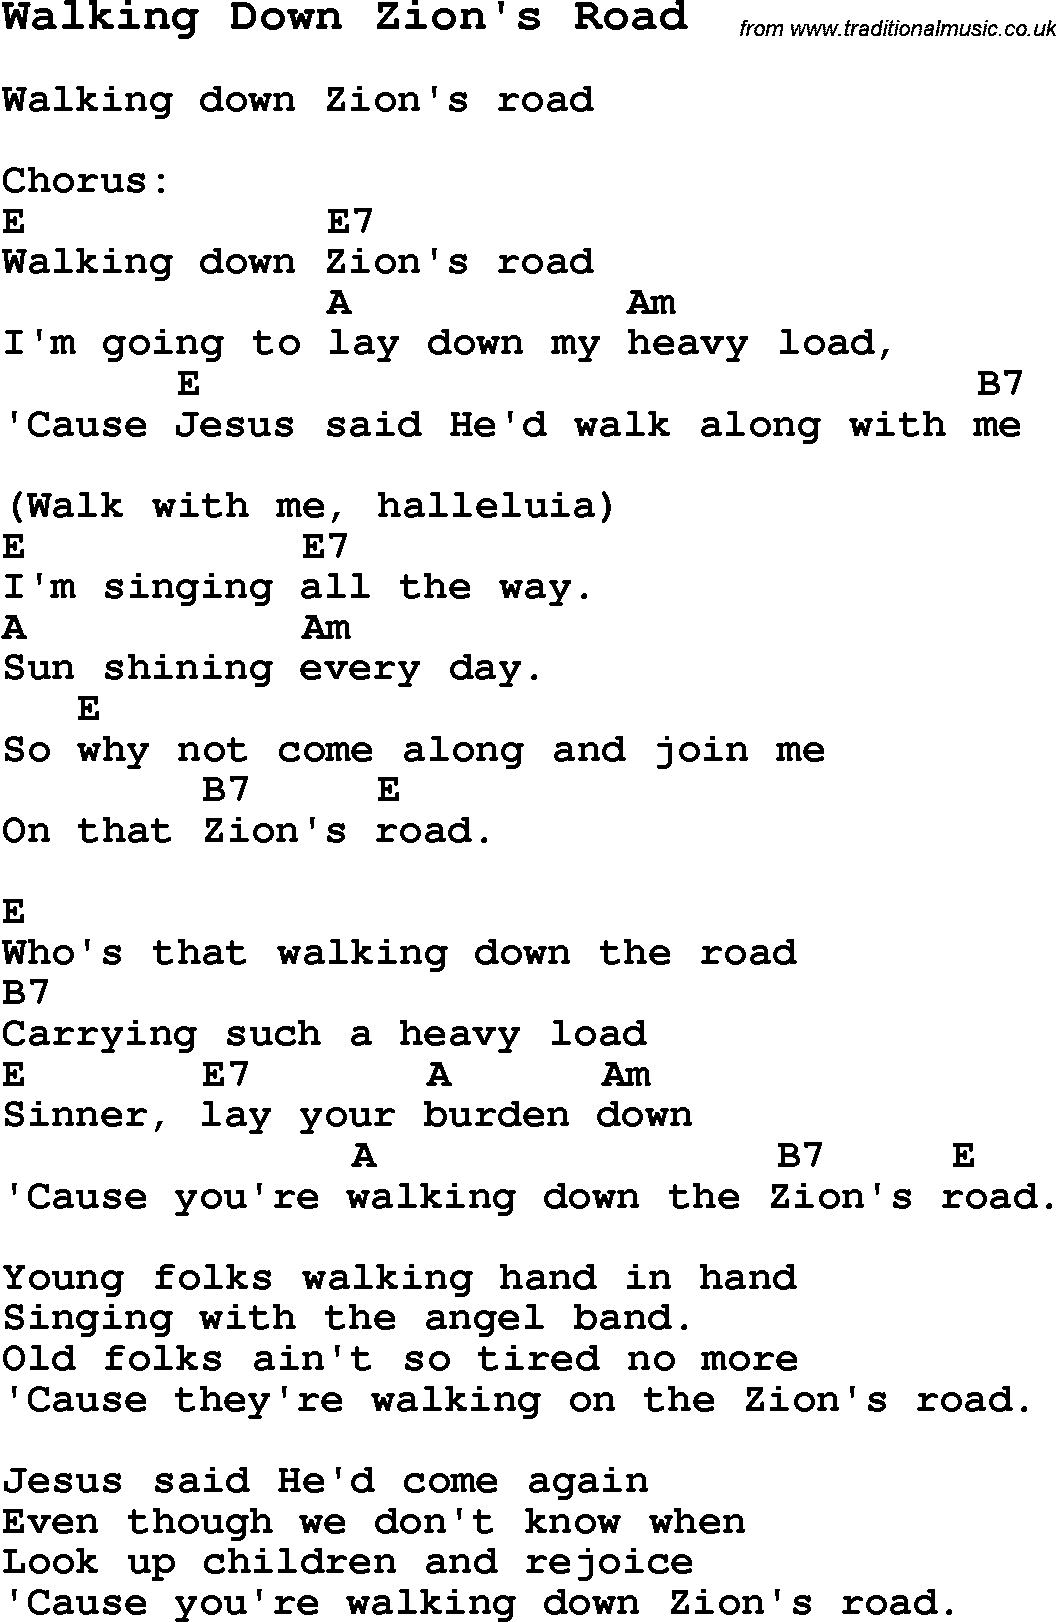 Summer-Camp Song, Walking Down Zion's Road, with lyrics and chords for Ukulele, Guitar Banjo etc.